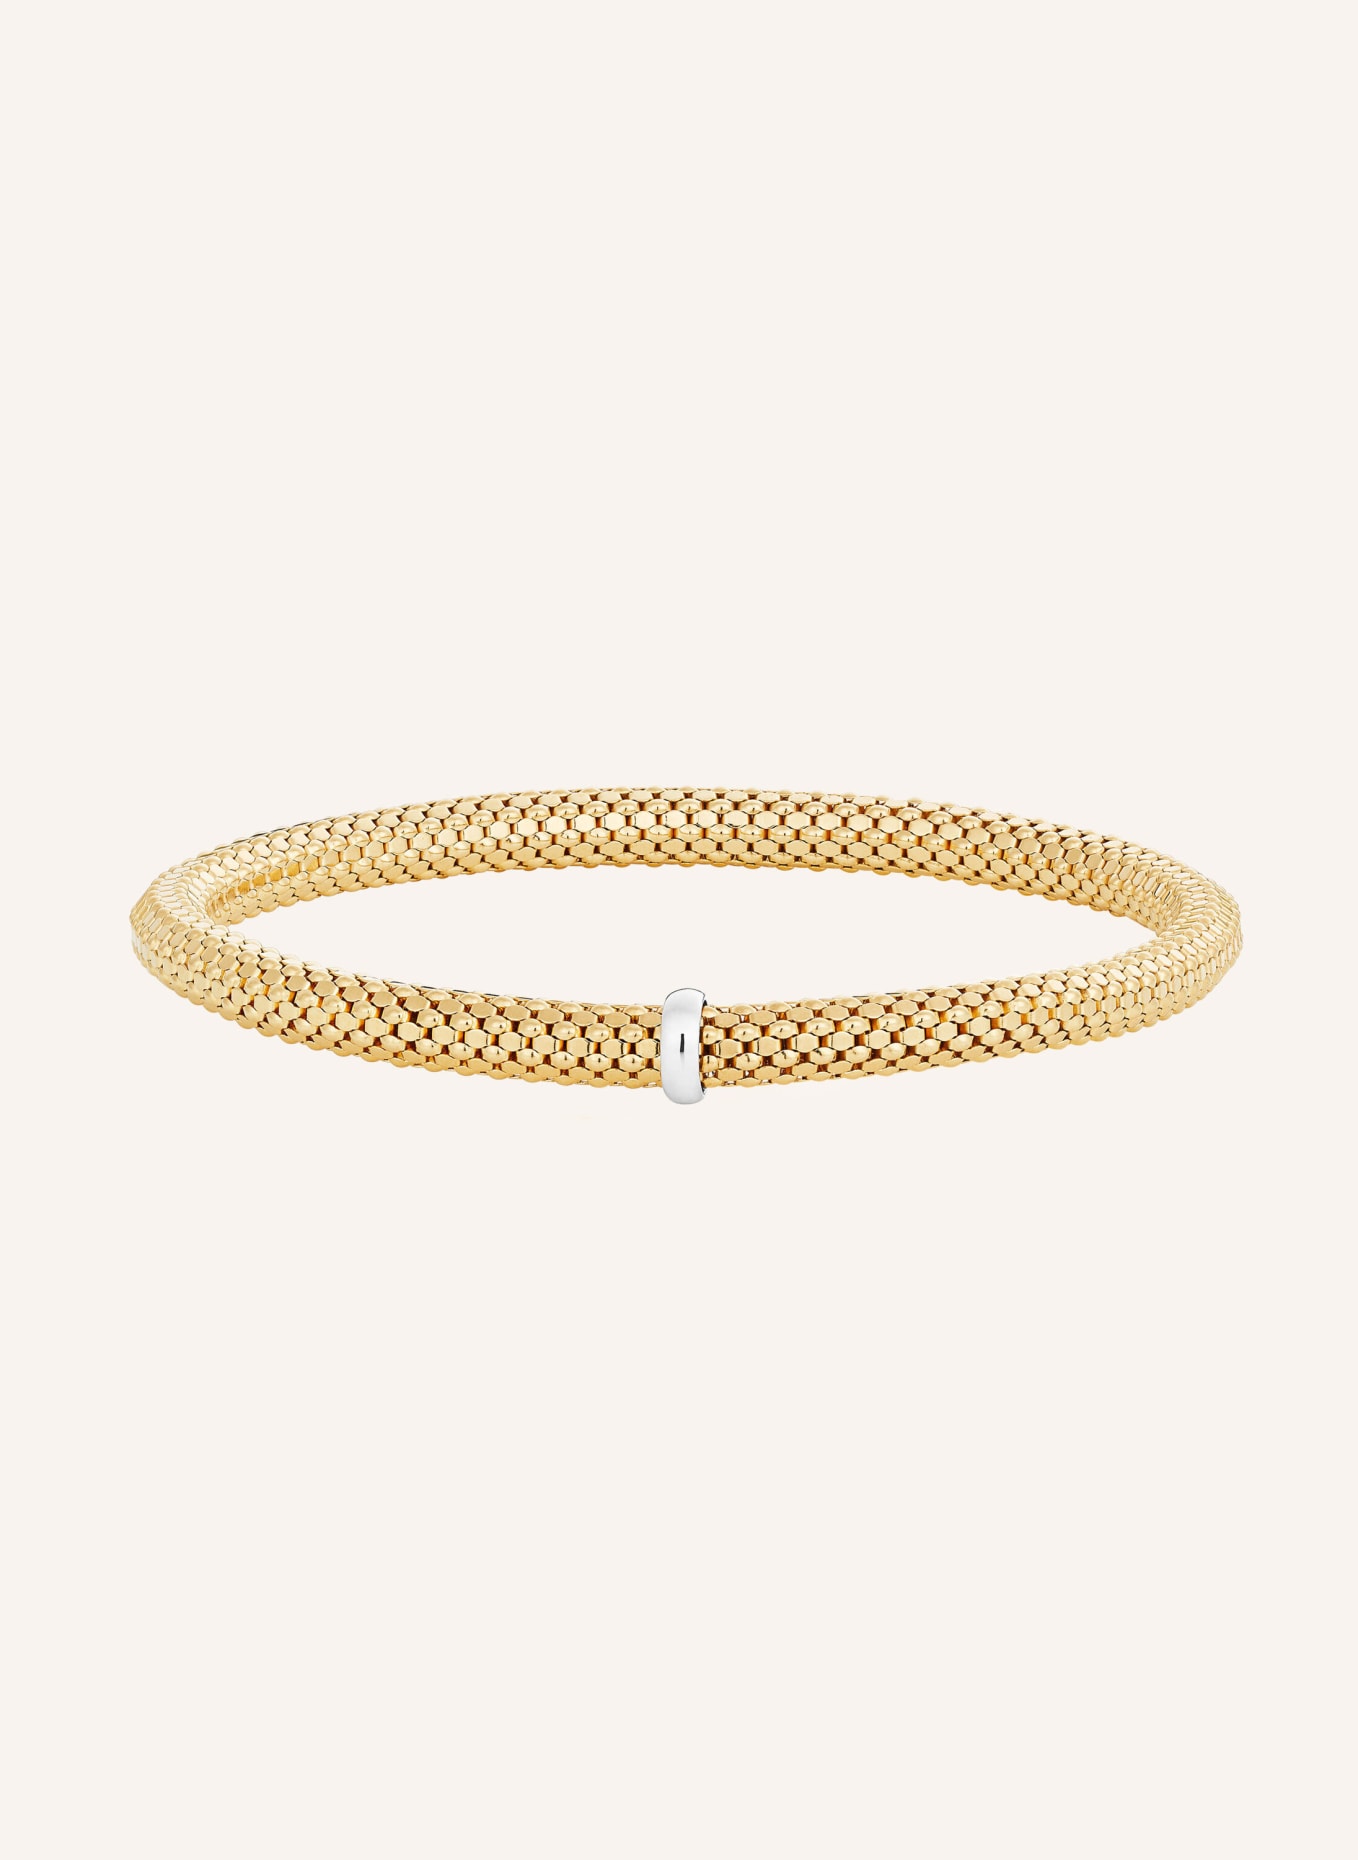 WEMPE Armband MINIMALISM by Wempe Casuals, Farbe: GOLD (Bild 1)